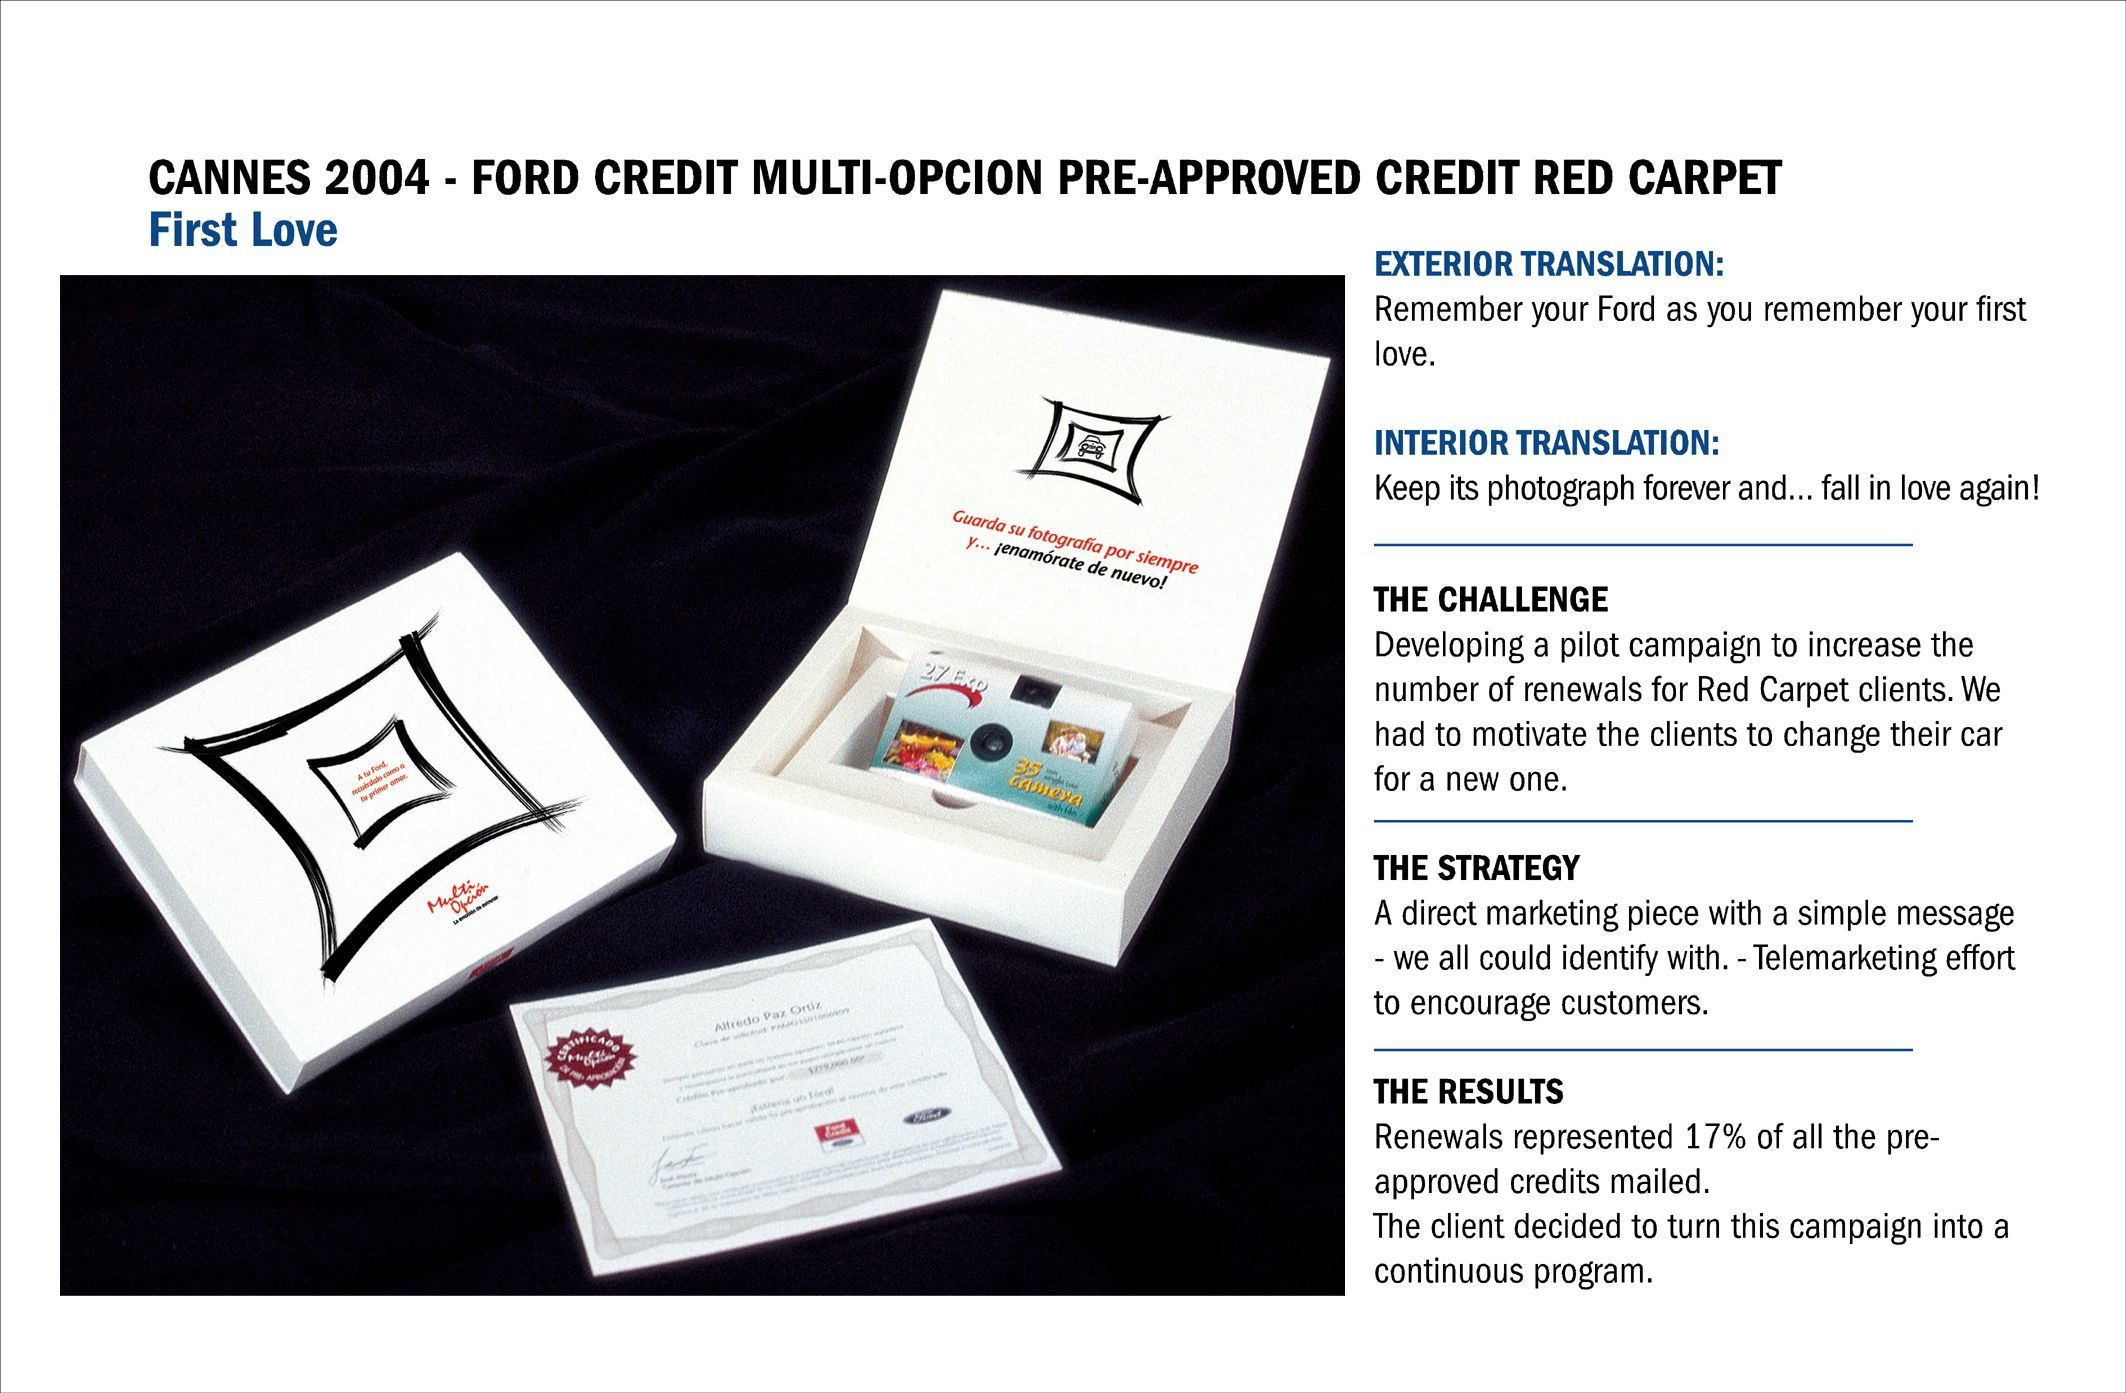 PRE-APPROVED CREDIT